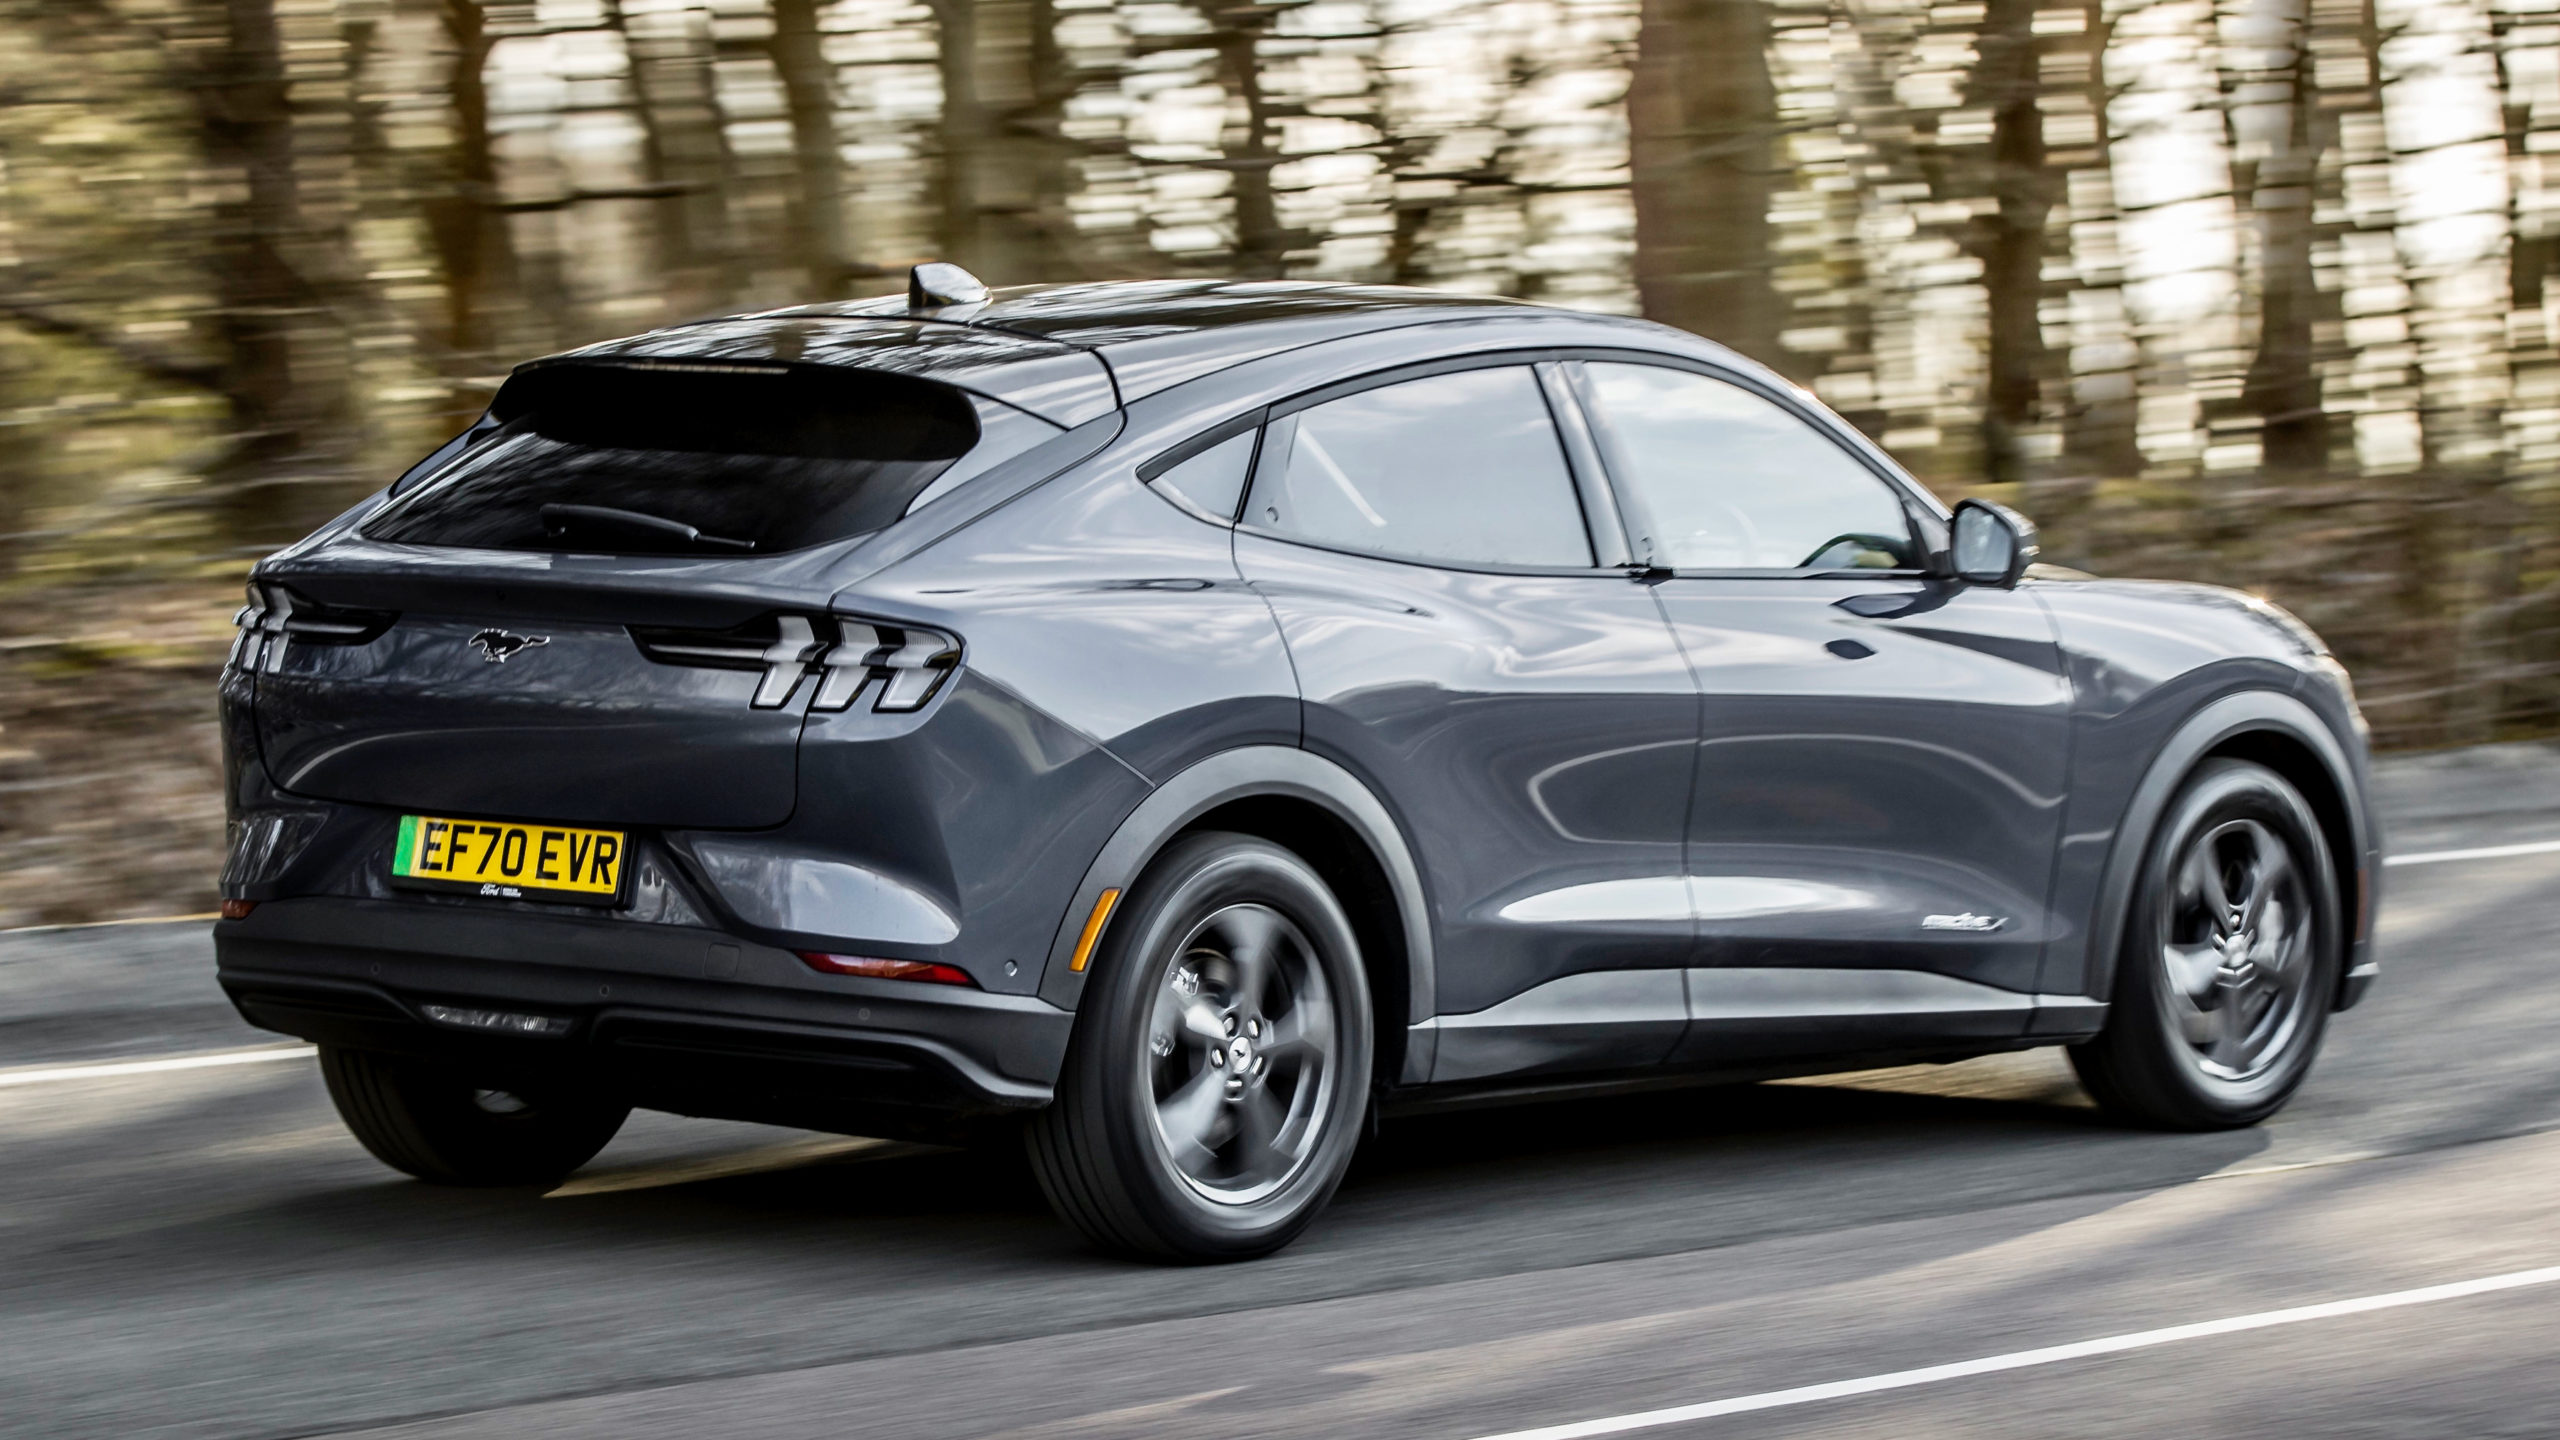 Drive Co Uk Electric Cars The Ford Mustang Mach E All Electric Suv Reviewed